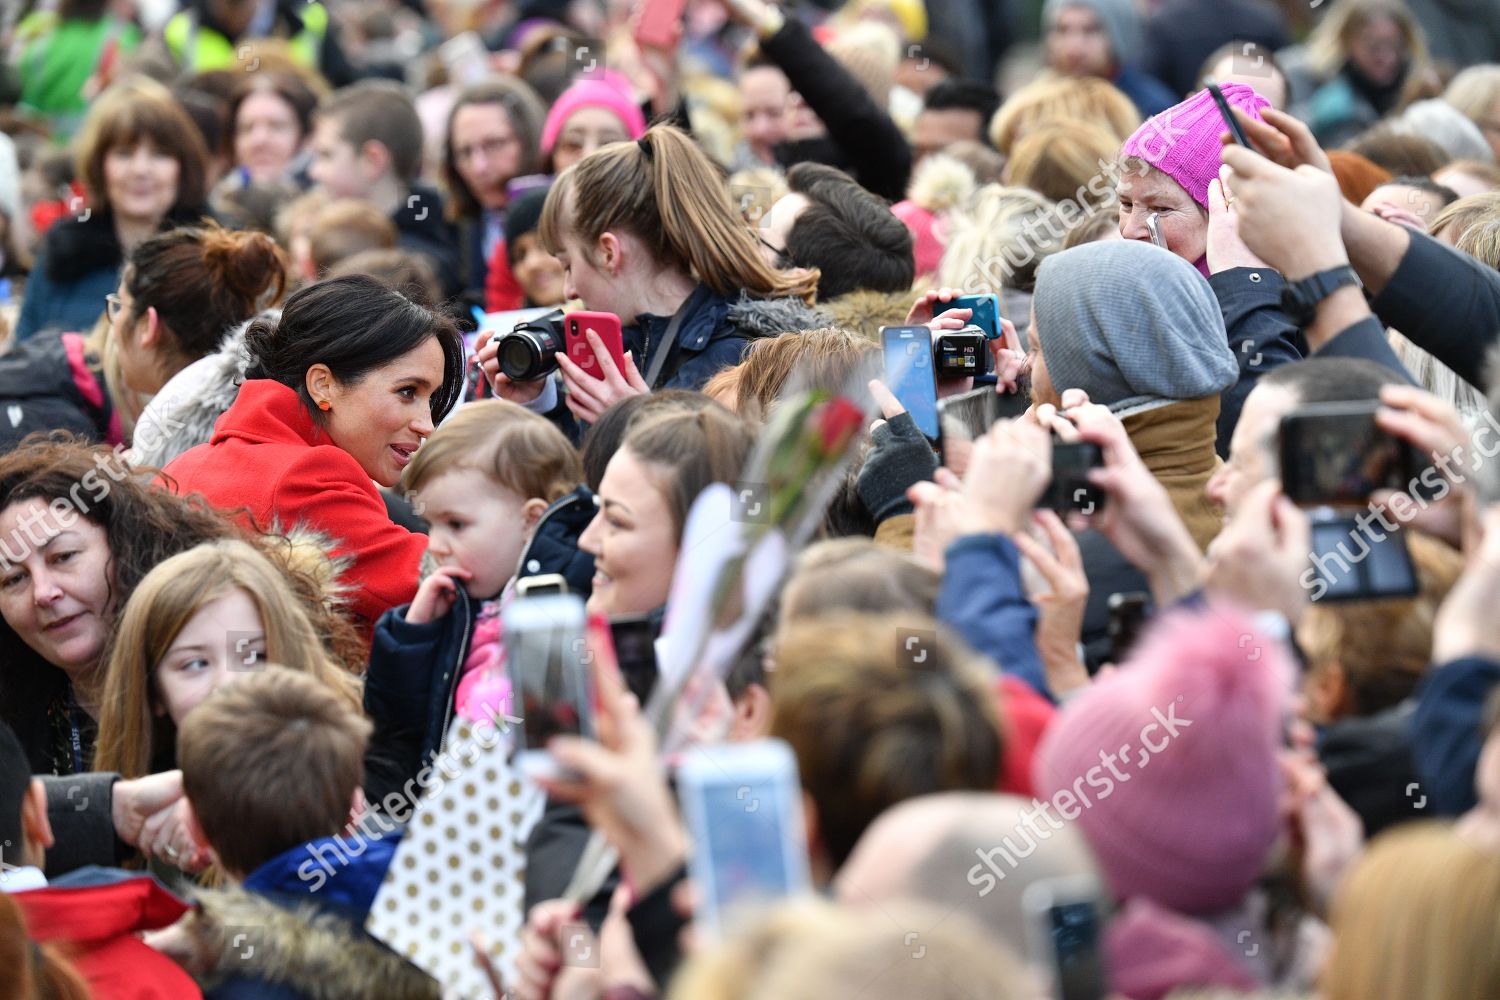 prince-harry-and-meghan-duchess-of-sussex-visit-to-birkenhead-uk-shutterstock-editorial-10056189am.jpg